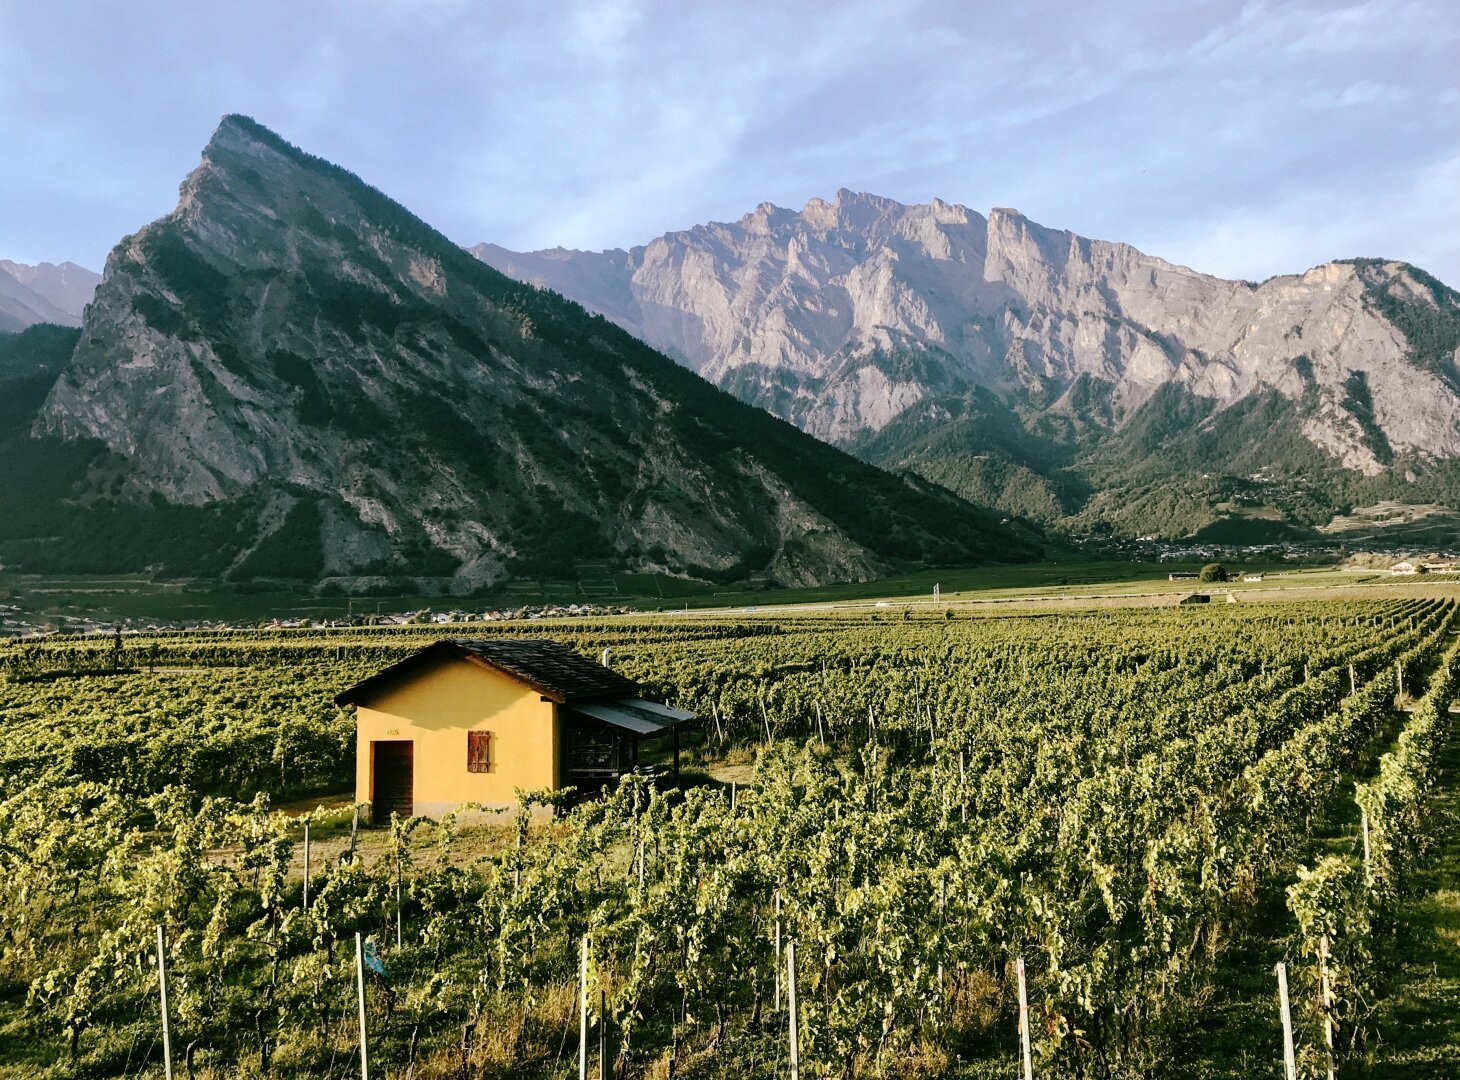 Yellow cabin in a vineyard with mountains in the background.